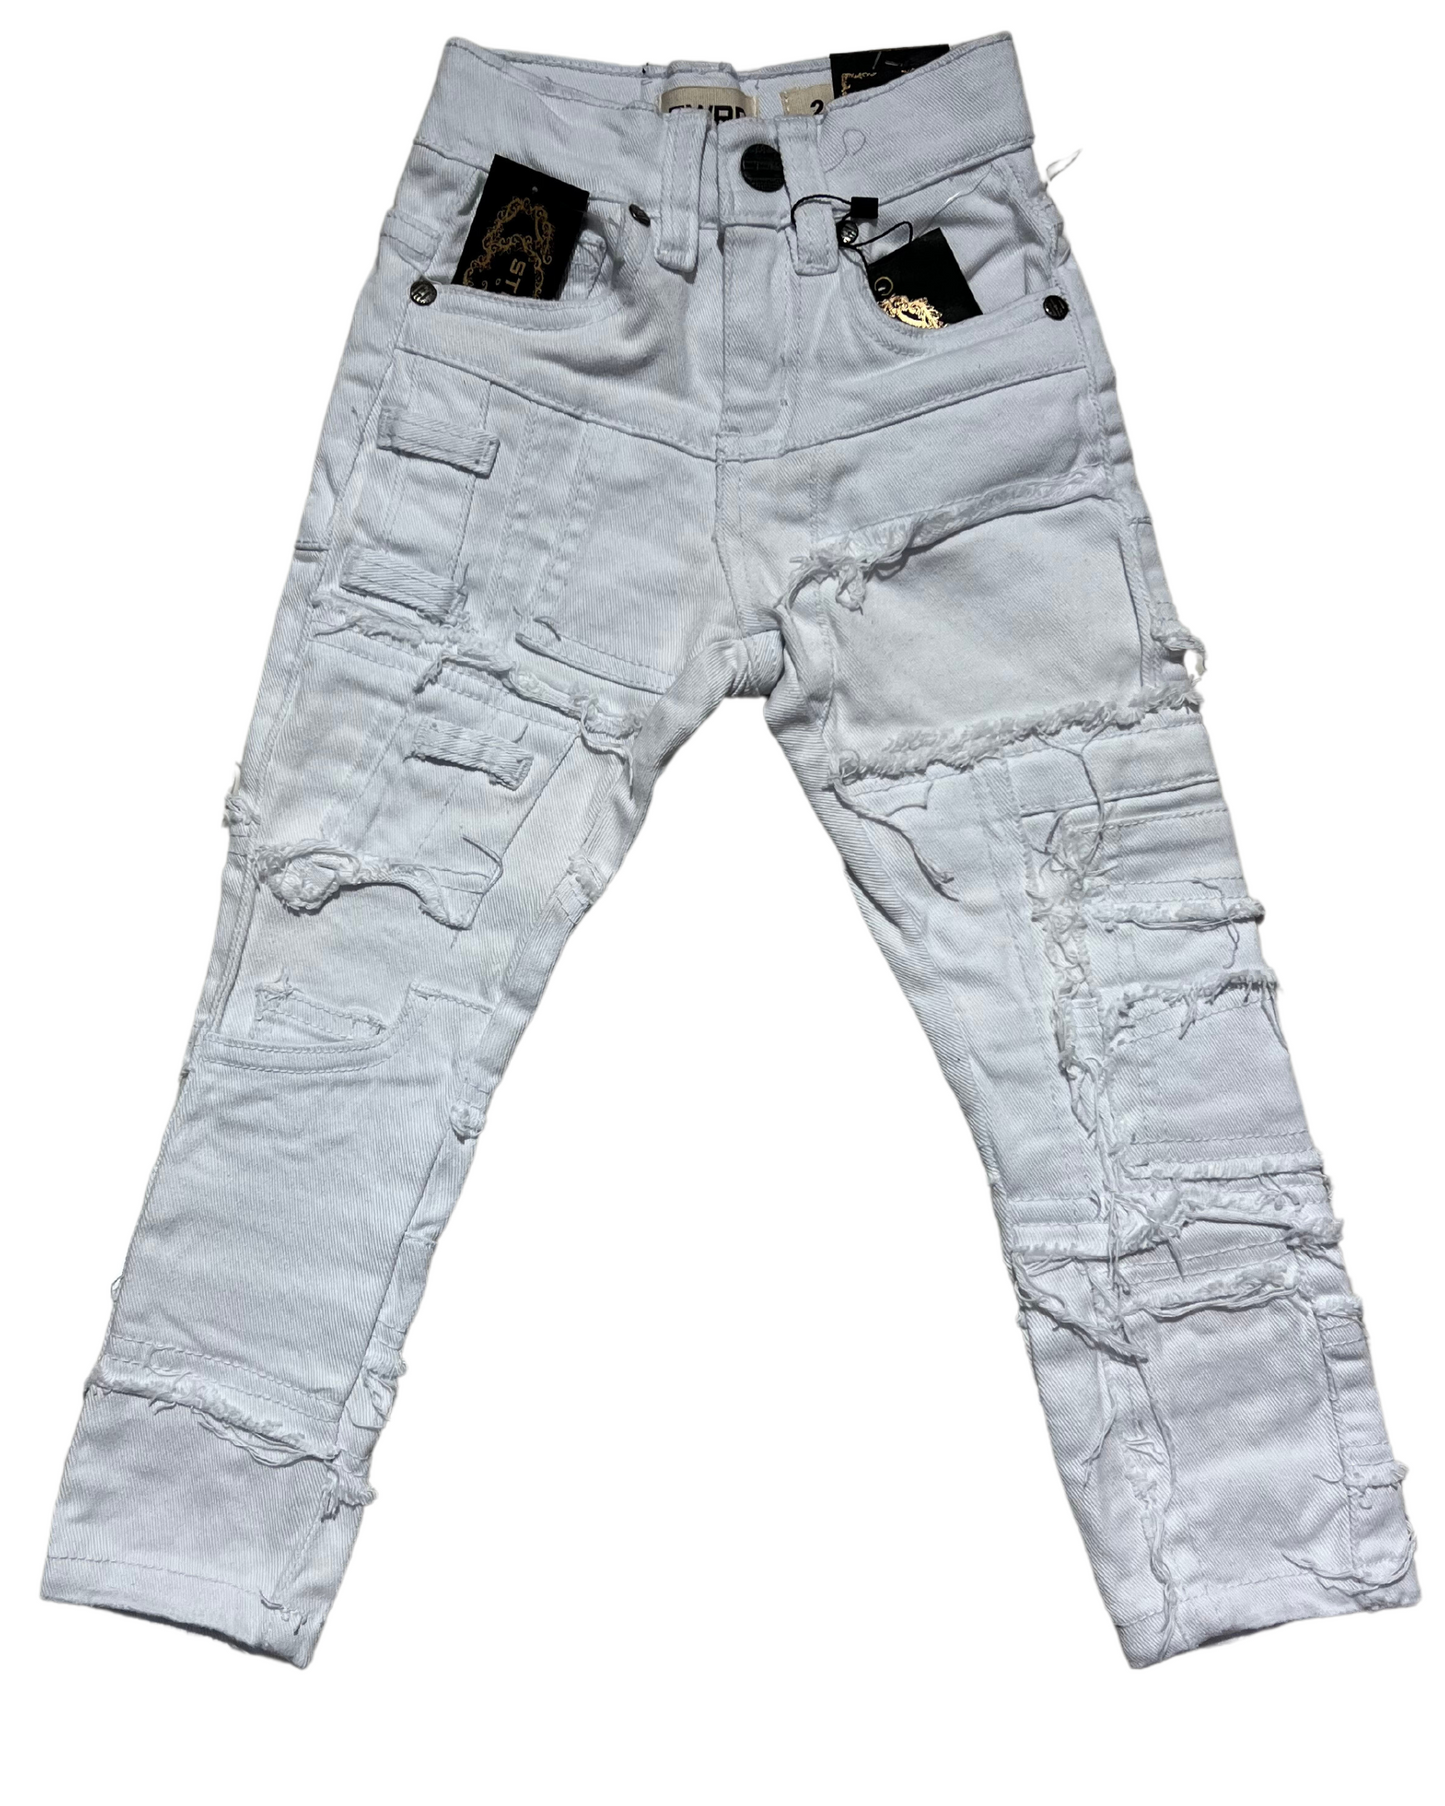 Kids Patches Slim Jeans 33922